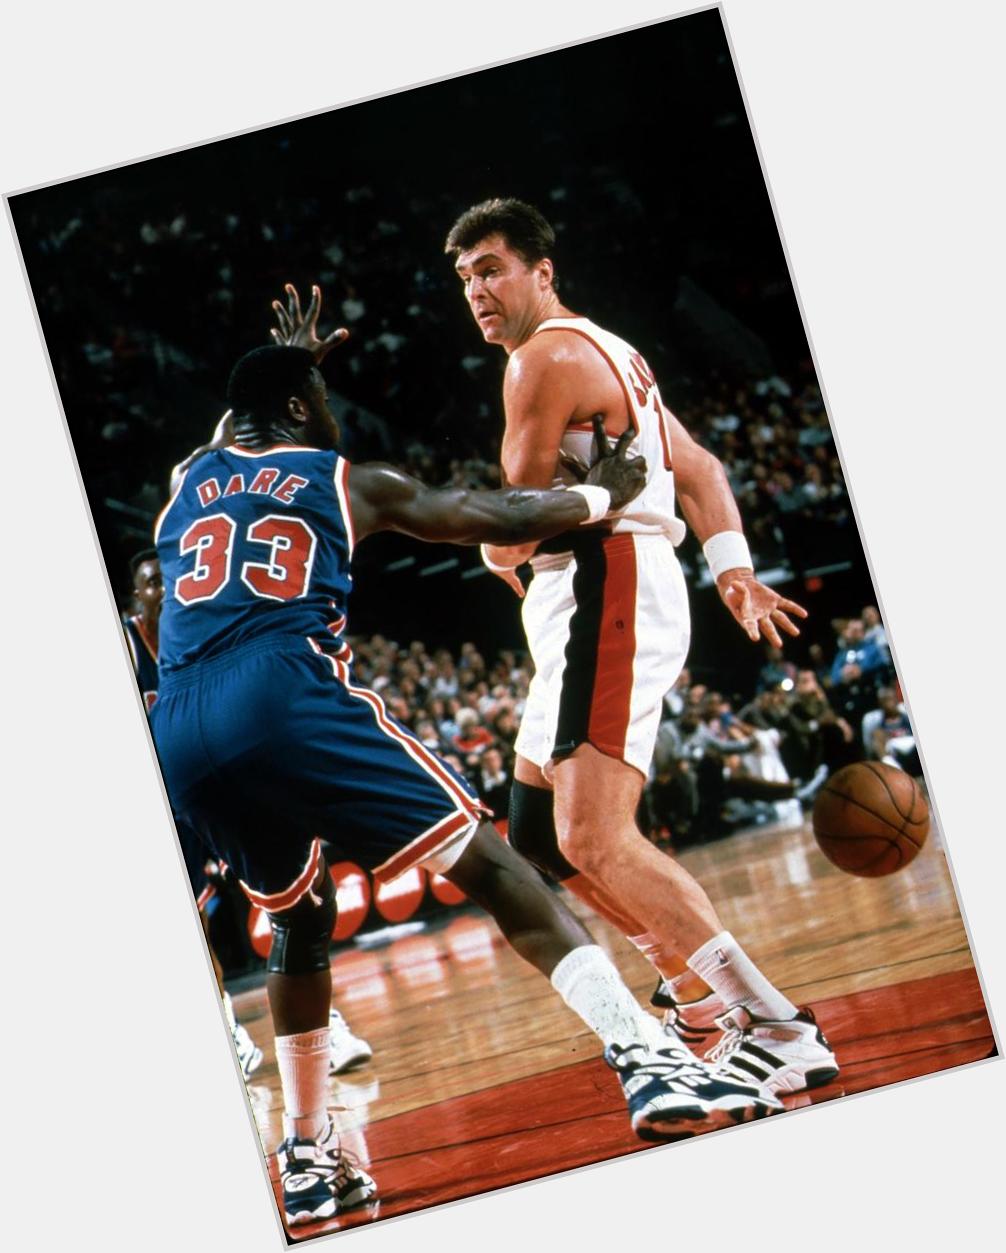 Happy 50th birthday to Arvydas Sabonis, seen here confusing the hell out of poor Yinka: 